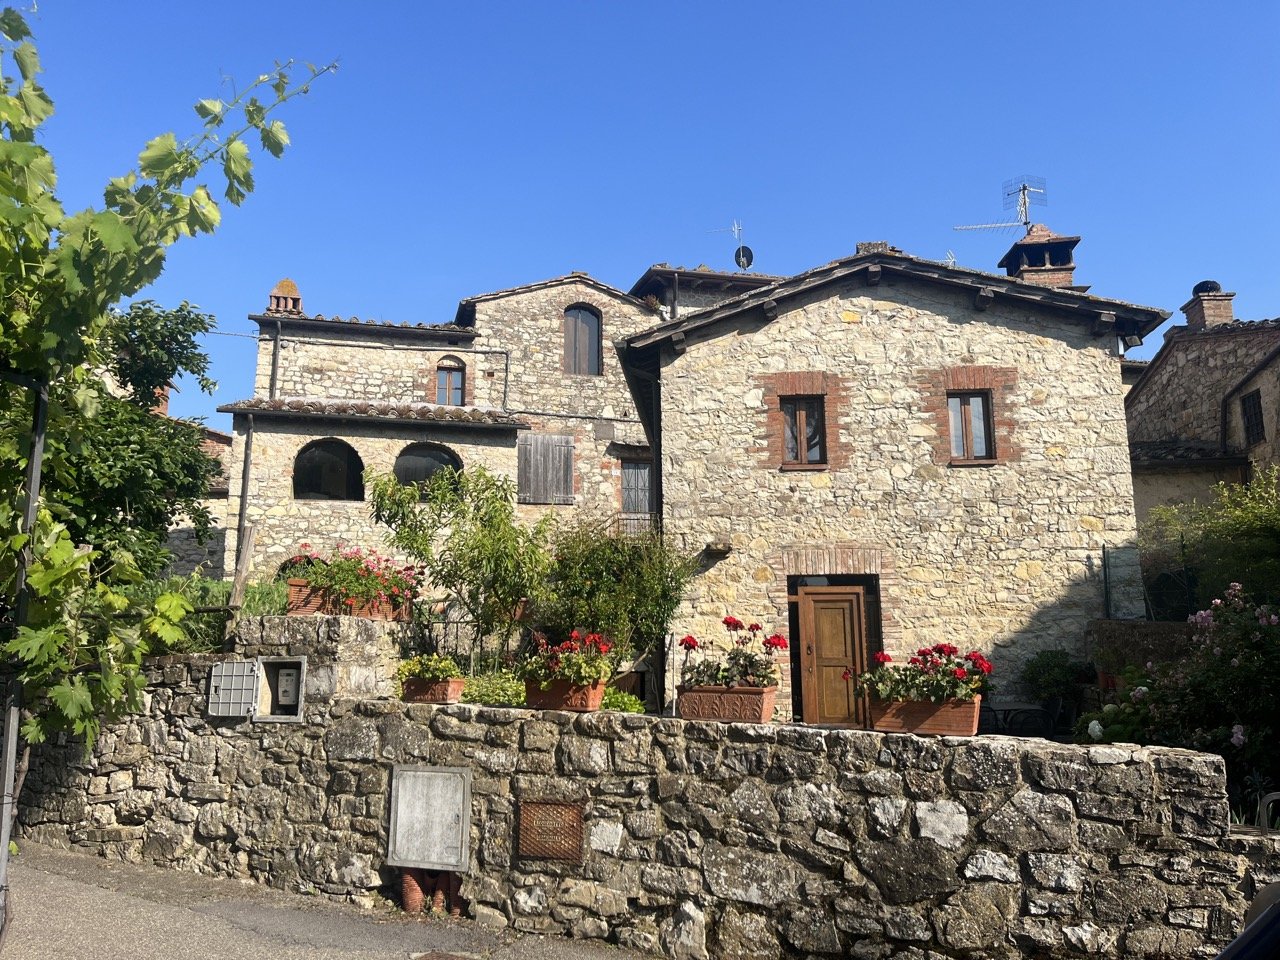 A stone wall in front of a lovely grouping of stone houses with wooden shutters and stone roofs in the small hamlet of San Sano in Tuscany's Chianti region.